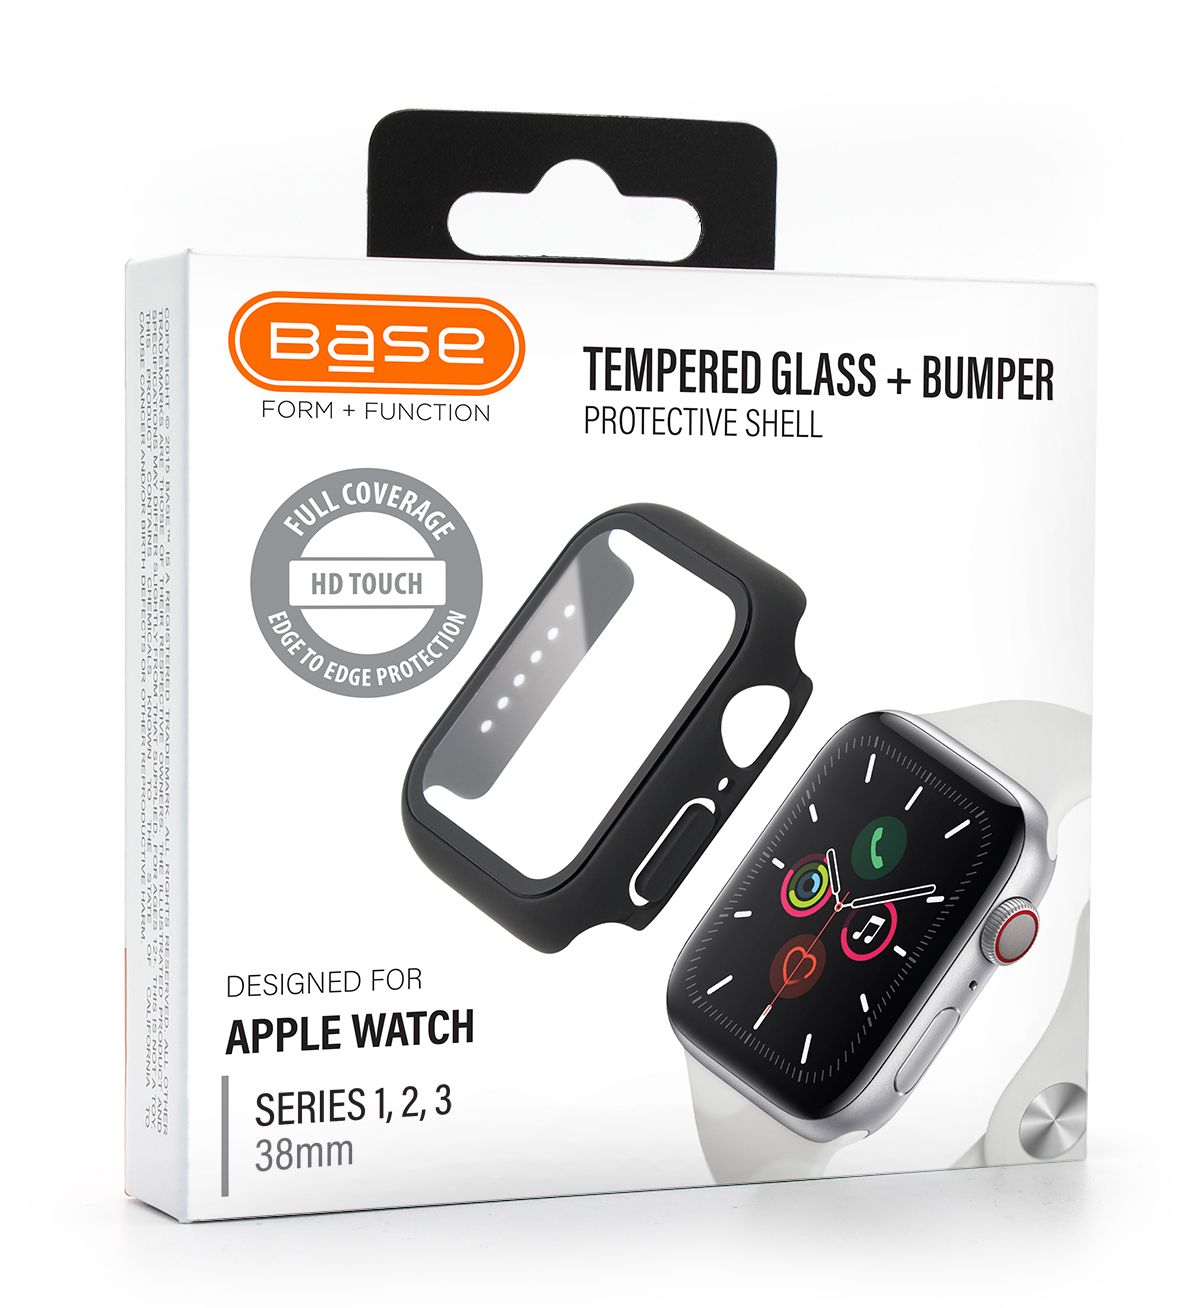 Base Bumper Tempered Glass for Apple Watch Series 1,2,3 Small (38mm)